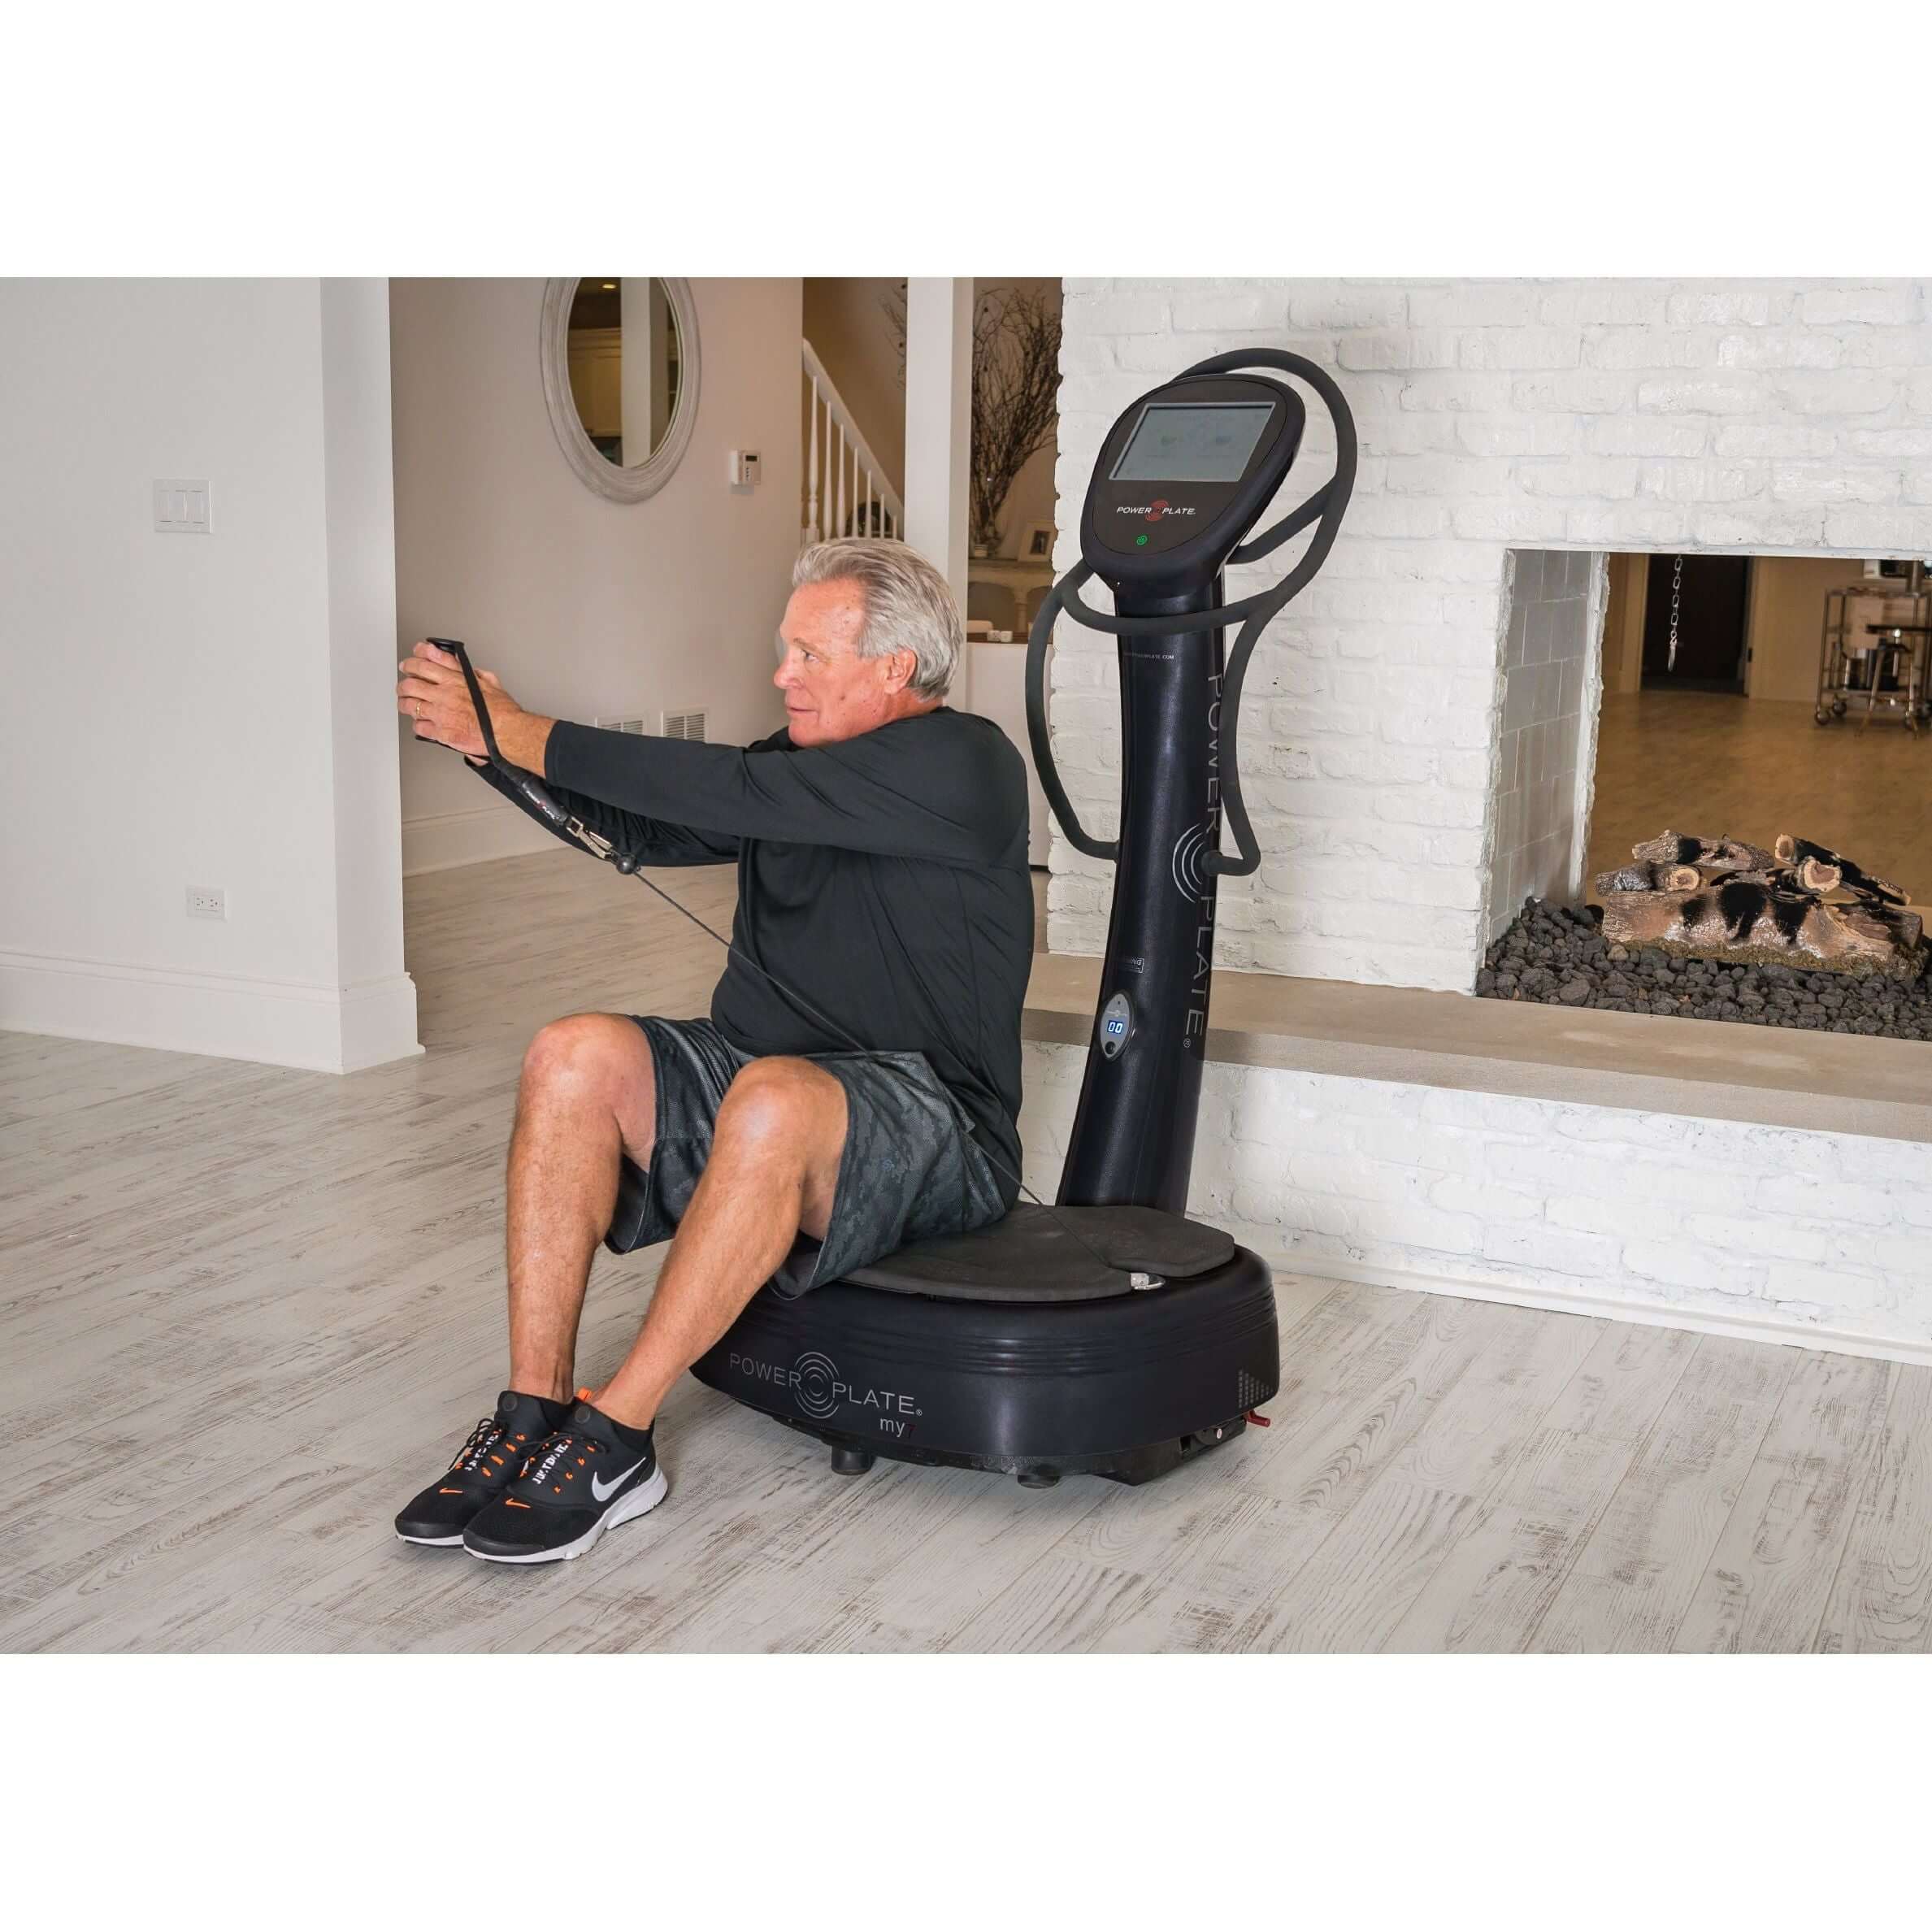 Power Plate my7 whole body vibration machine front view old man sitting and doing exercise